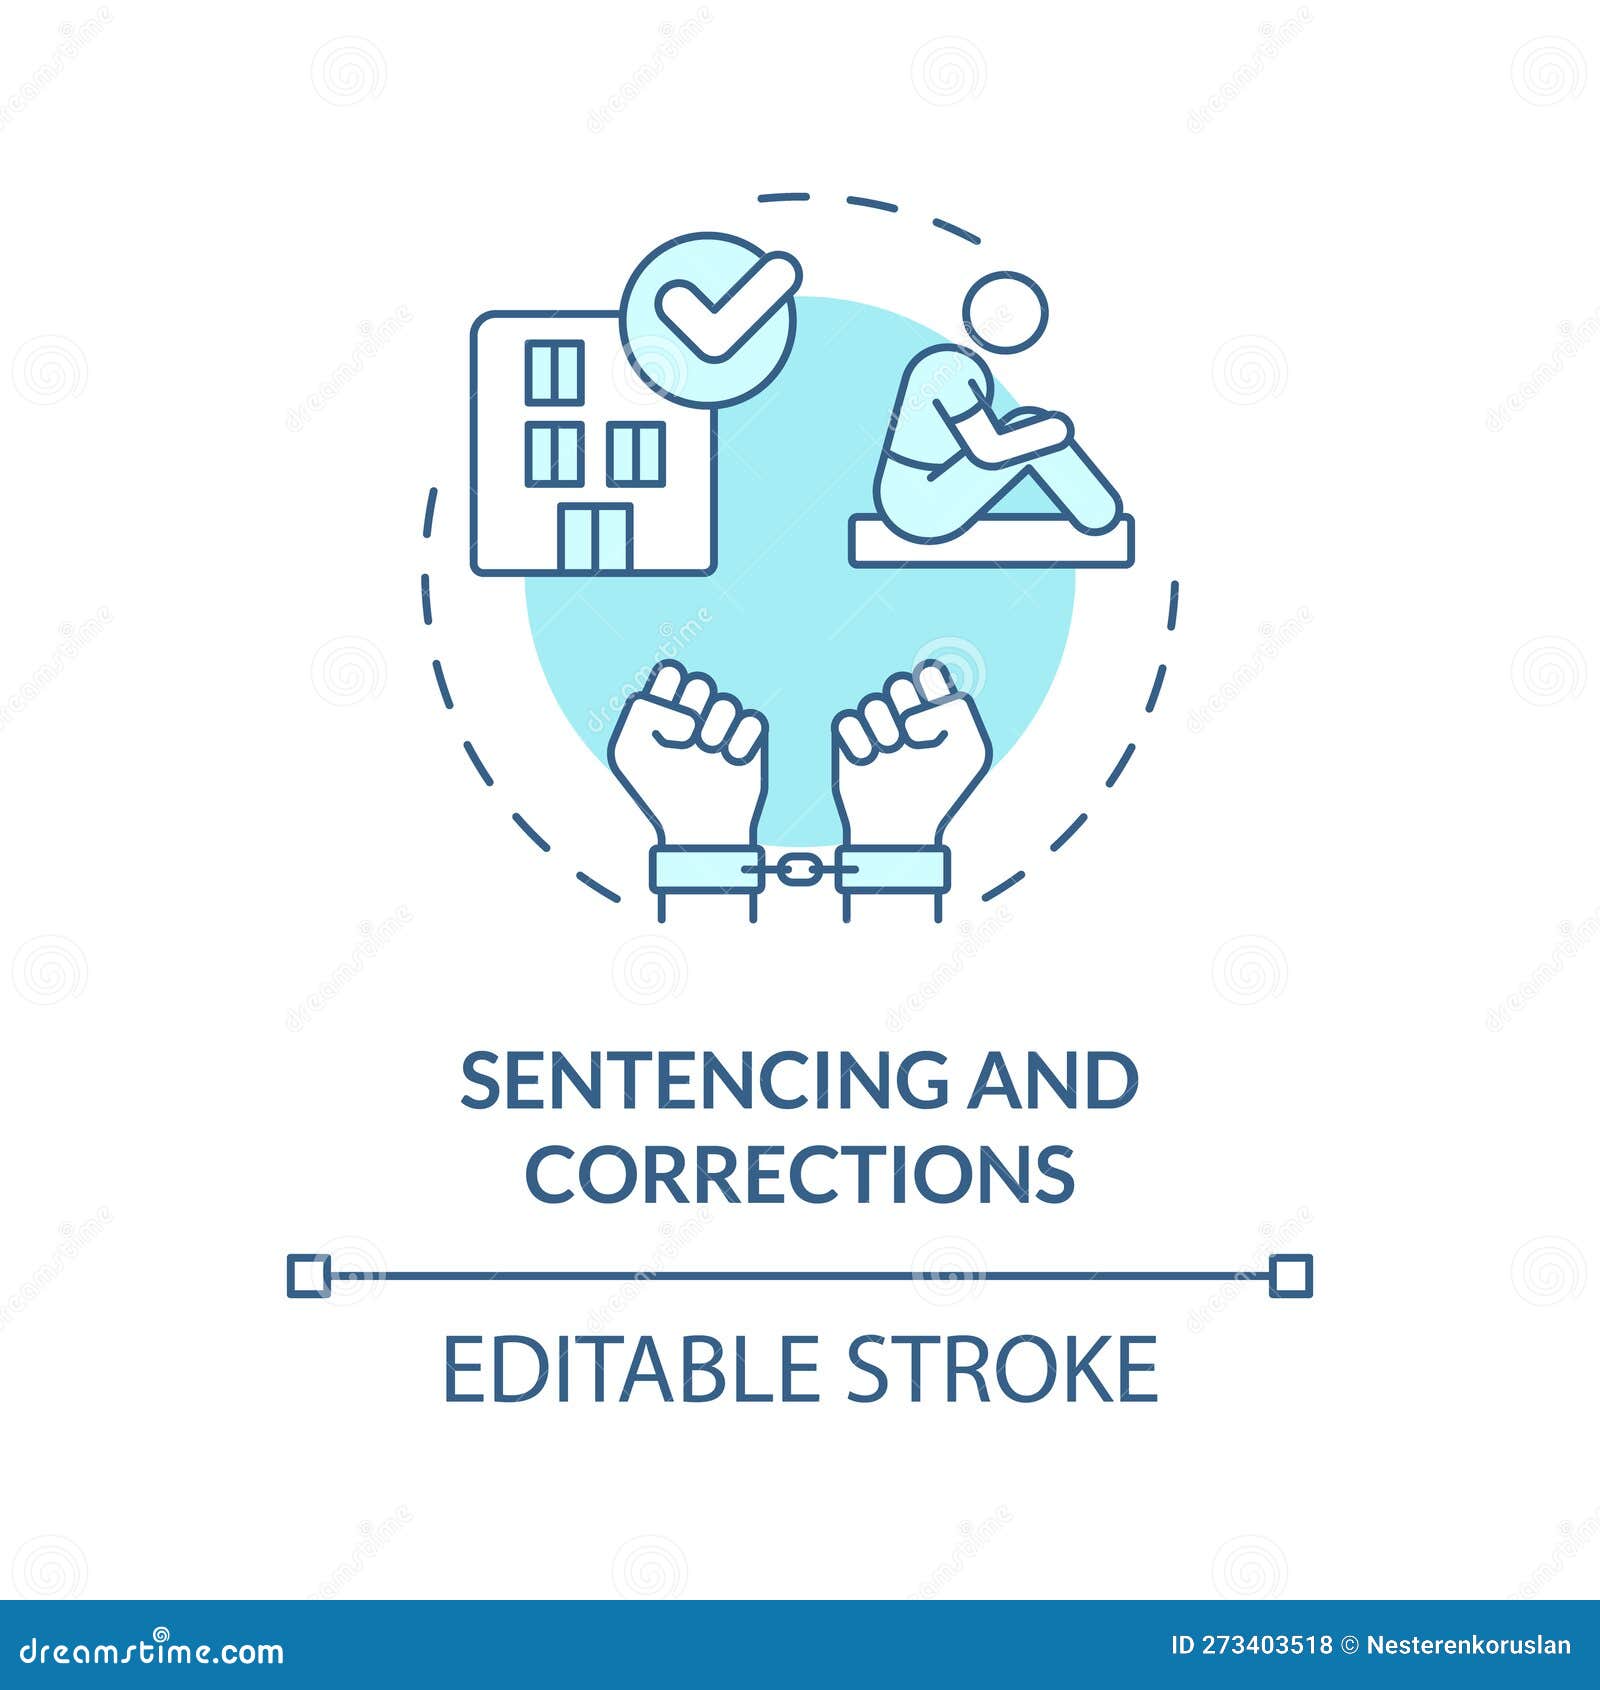 sentencing and corrections blue concept icon